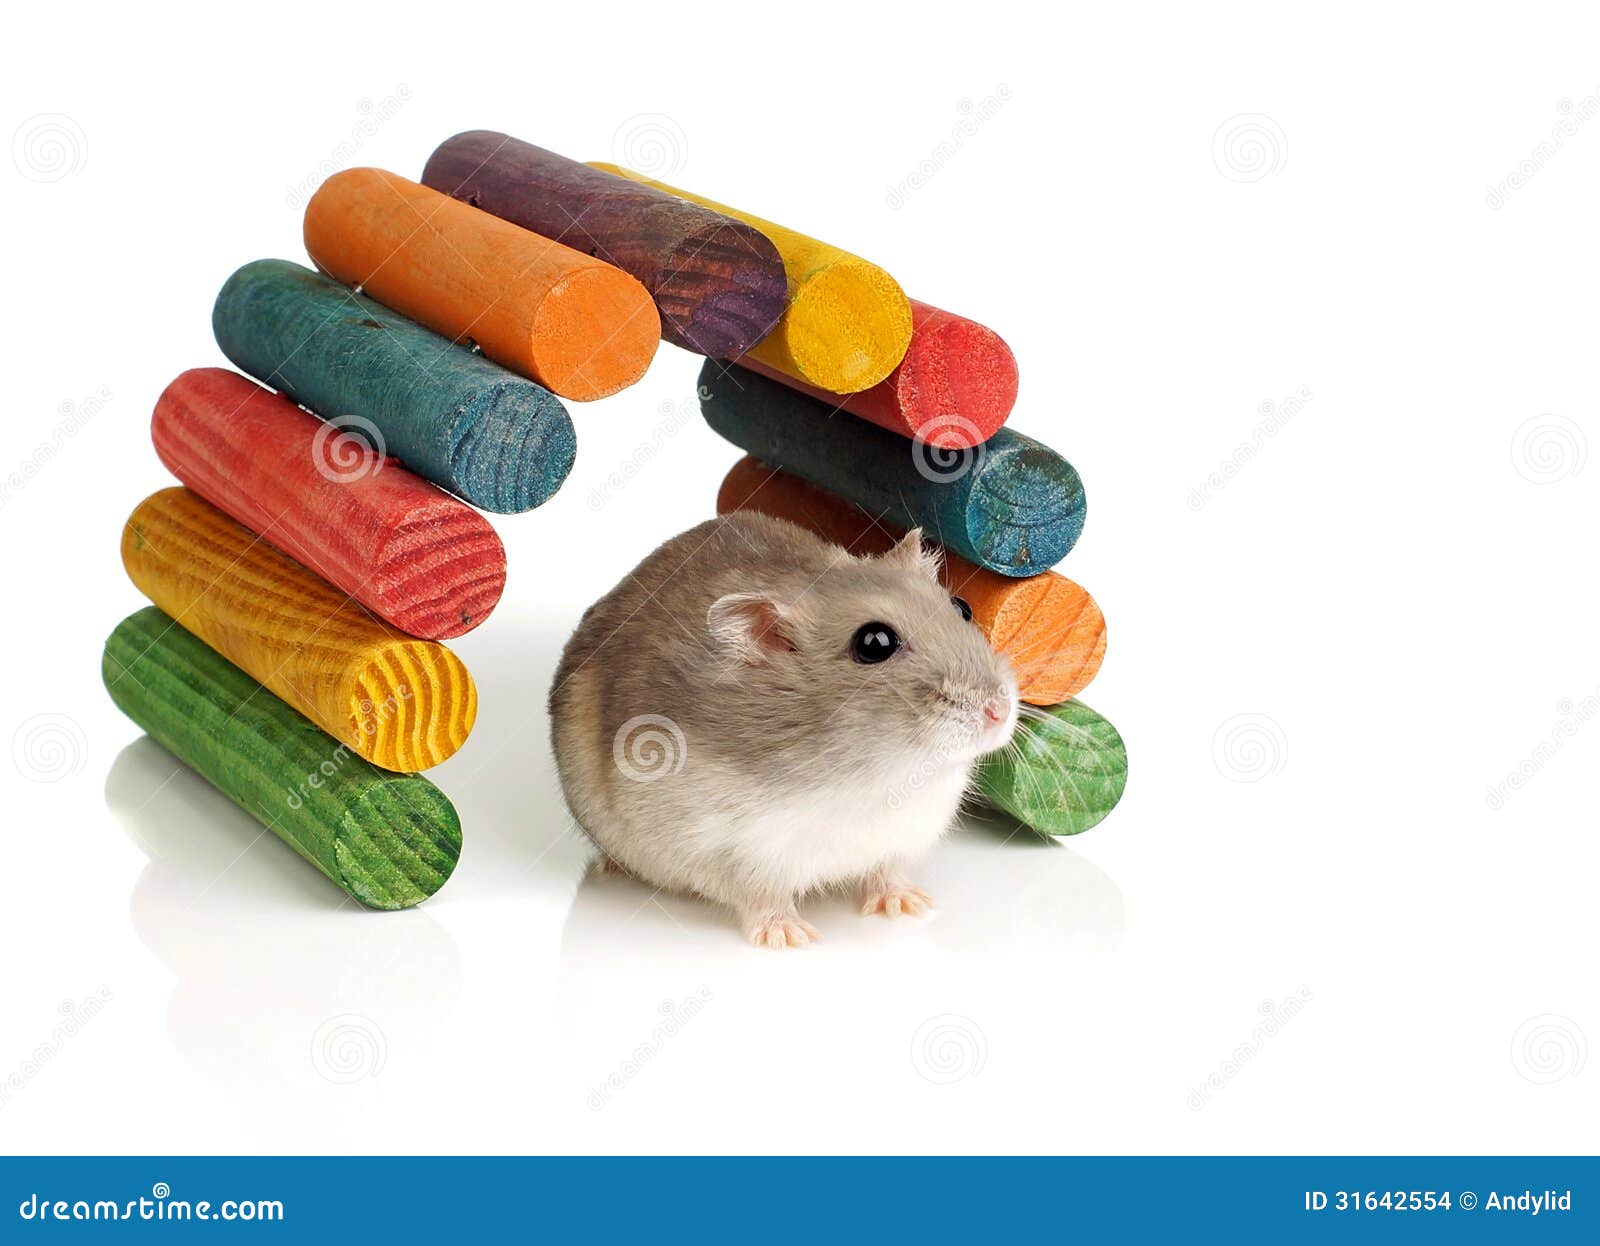 Small White Hamster On A White Background Stock Photo - Download